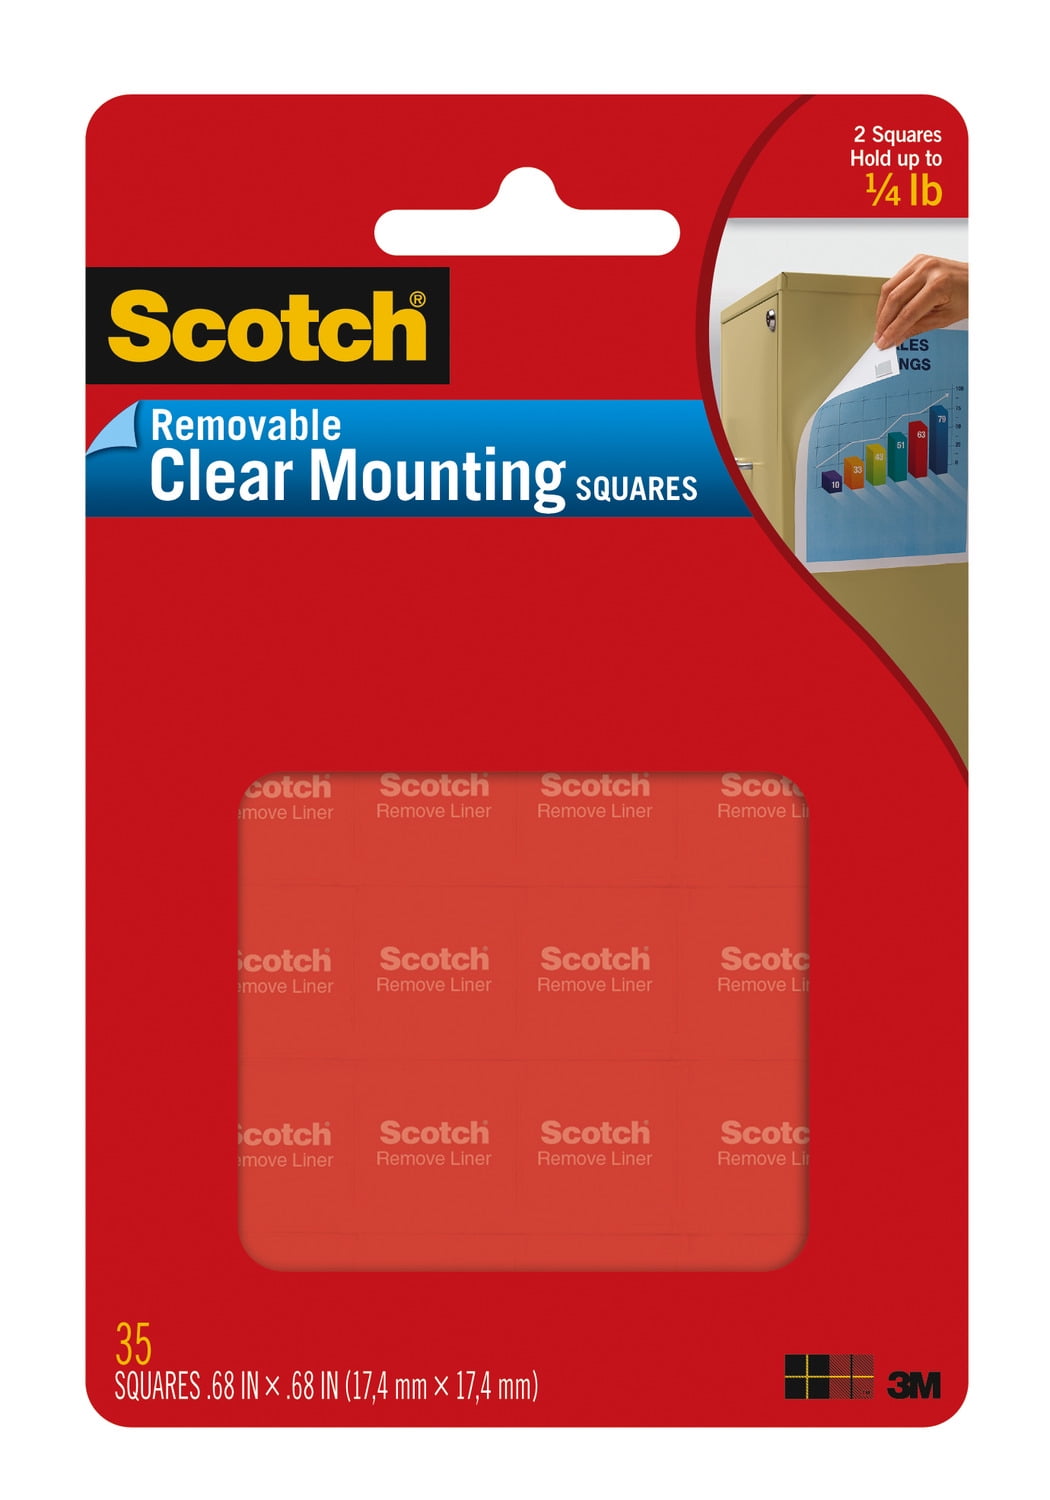 Scotch Removable Clear Mounting Squares, .68" x .68" Squares, 35 Total